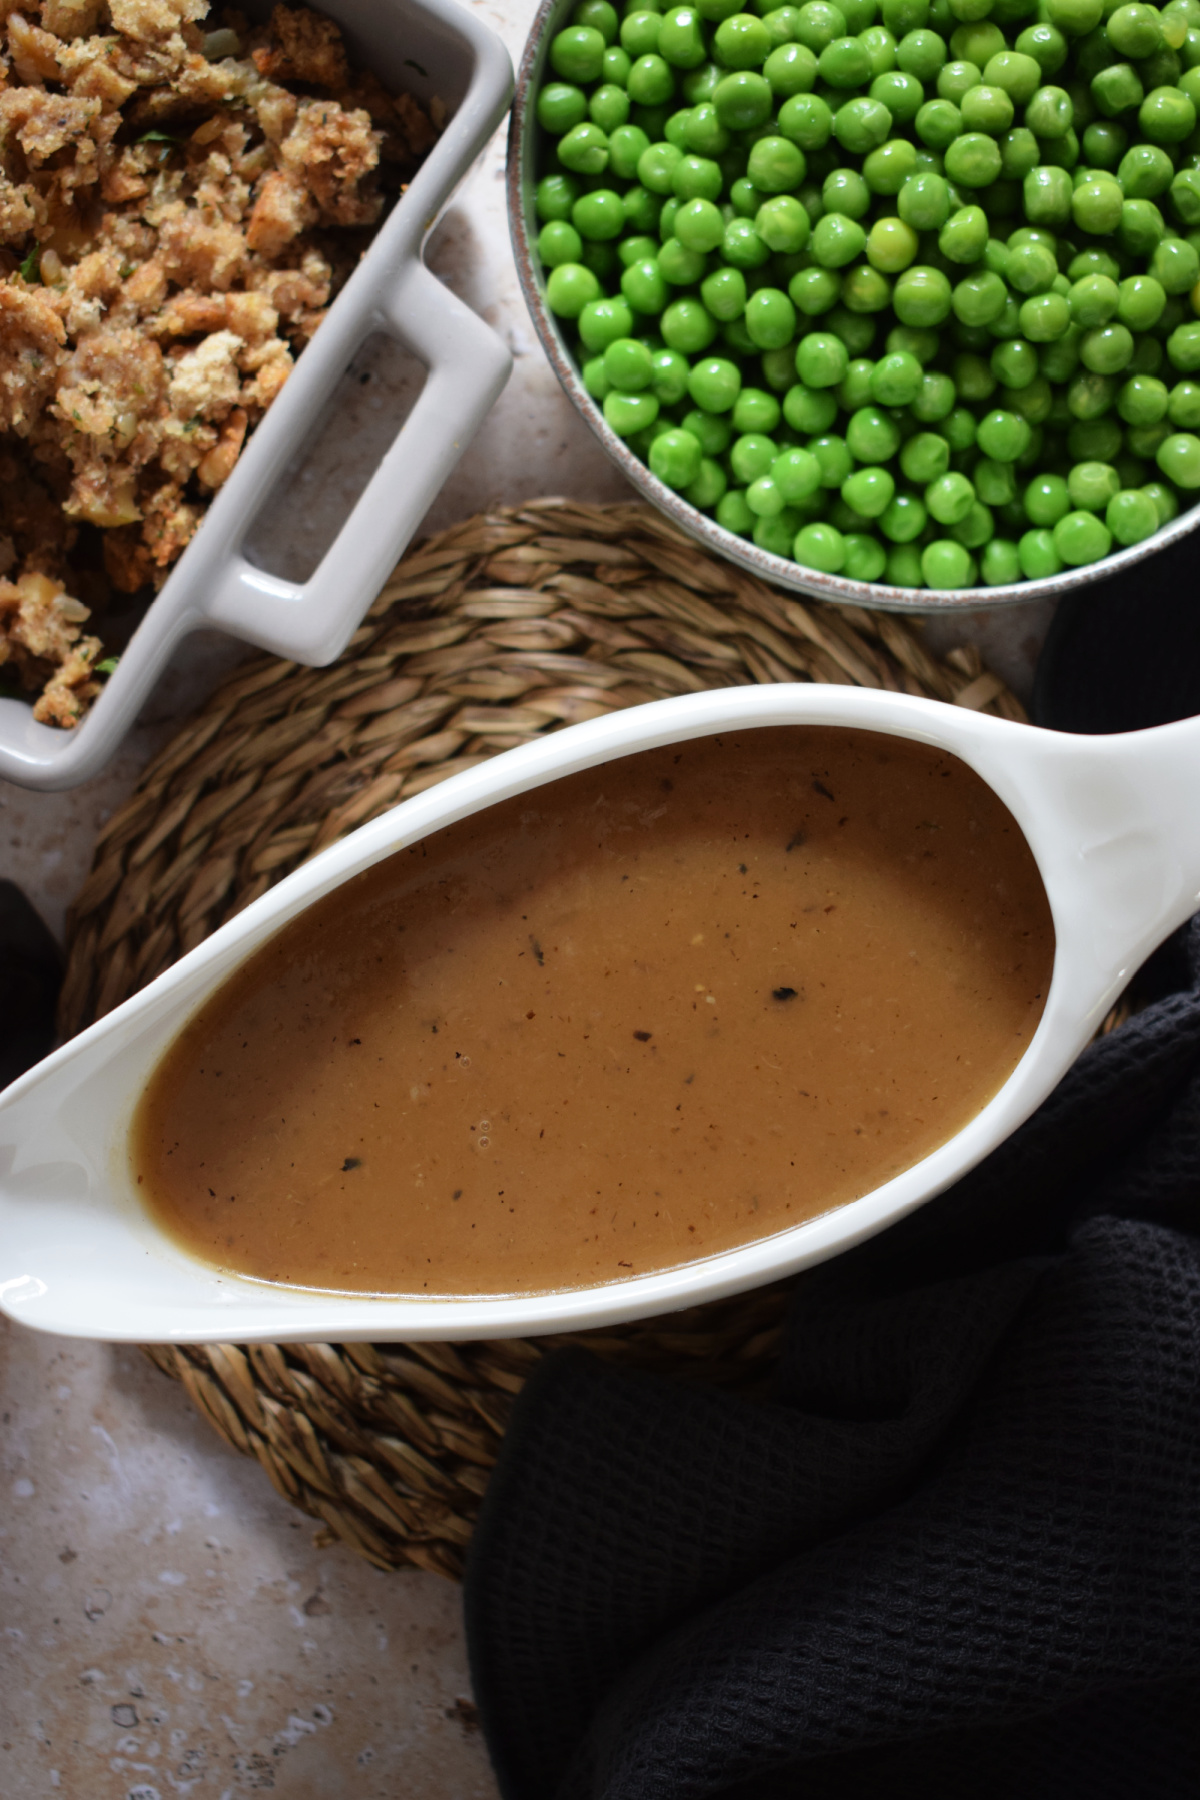 Brown Onion Gravy Recipe using Drippings or Beef Broth